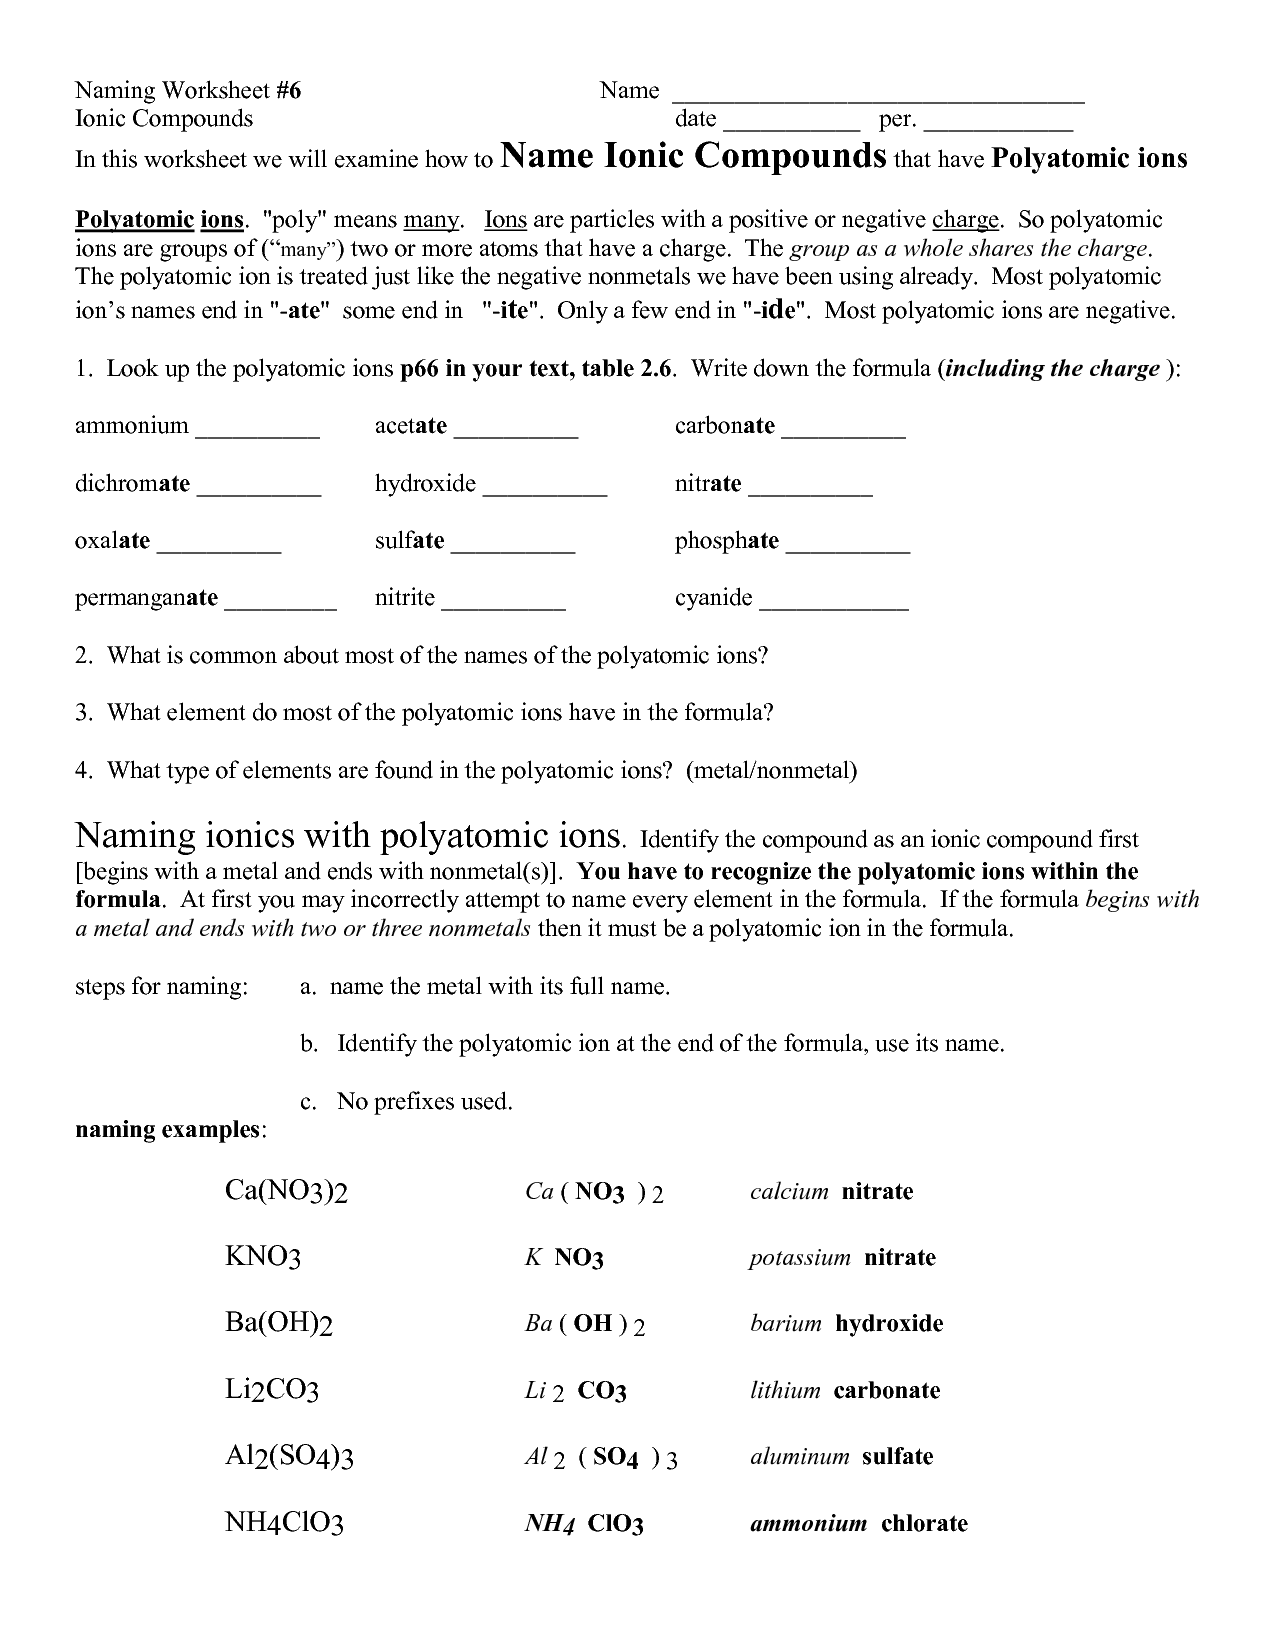 Polyatomic Ions Worksheet Answers Quizlet